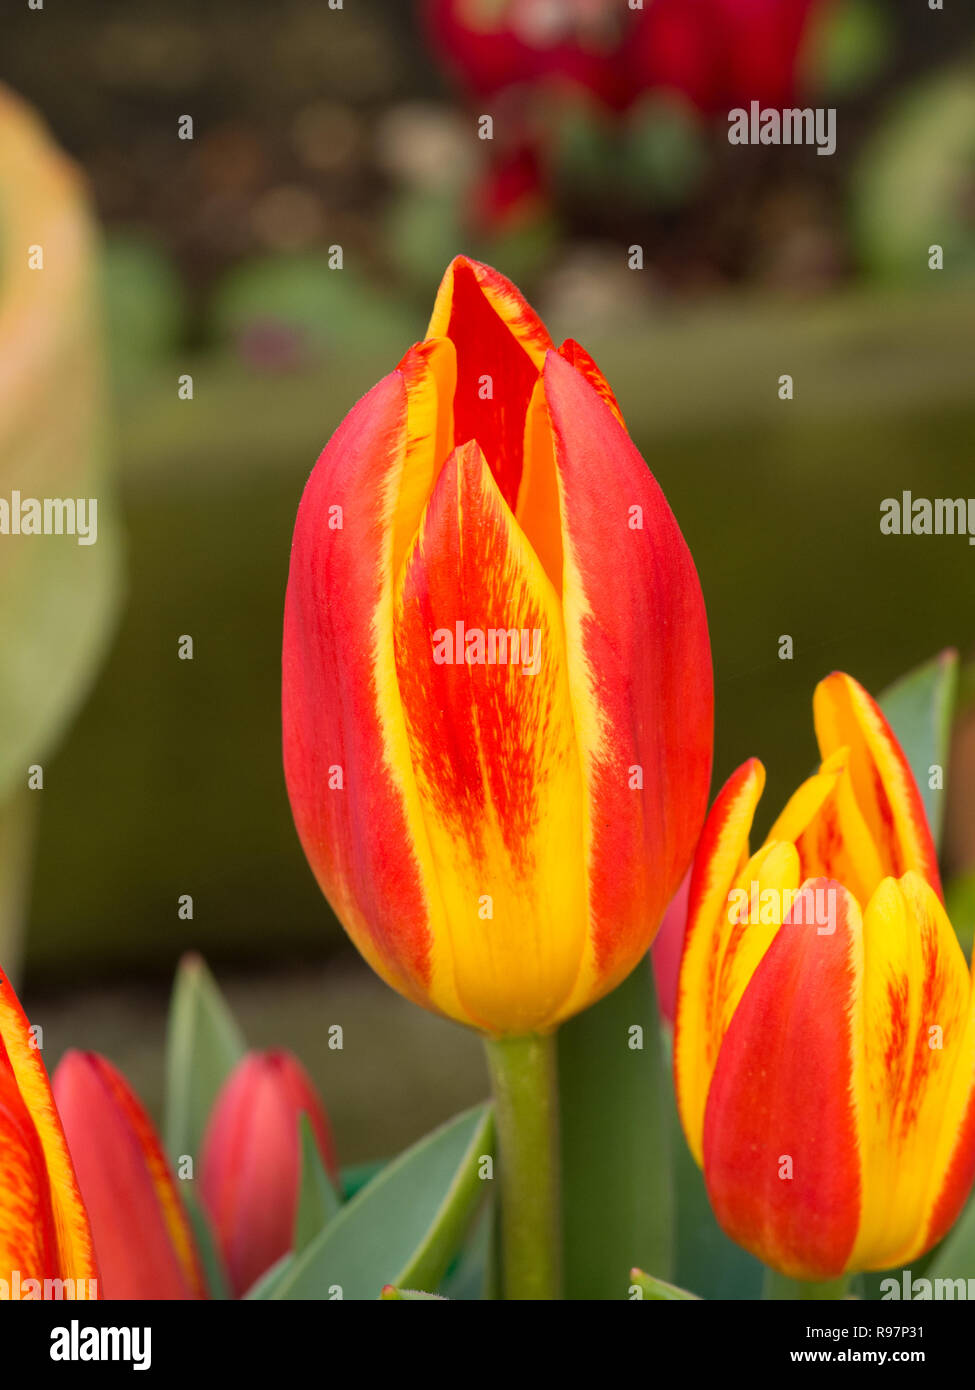 A close up of a single flower of the yellow flecked tulip Spanish Flag Stock Photo